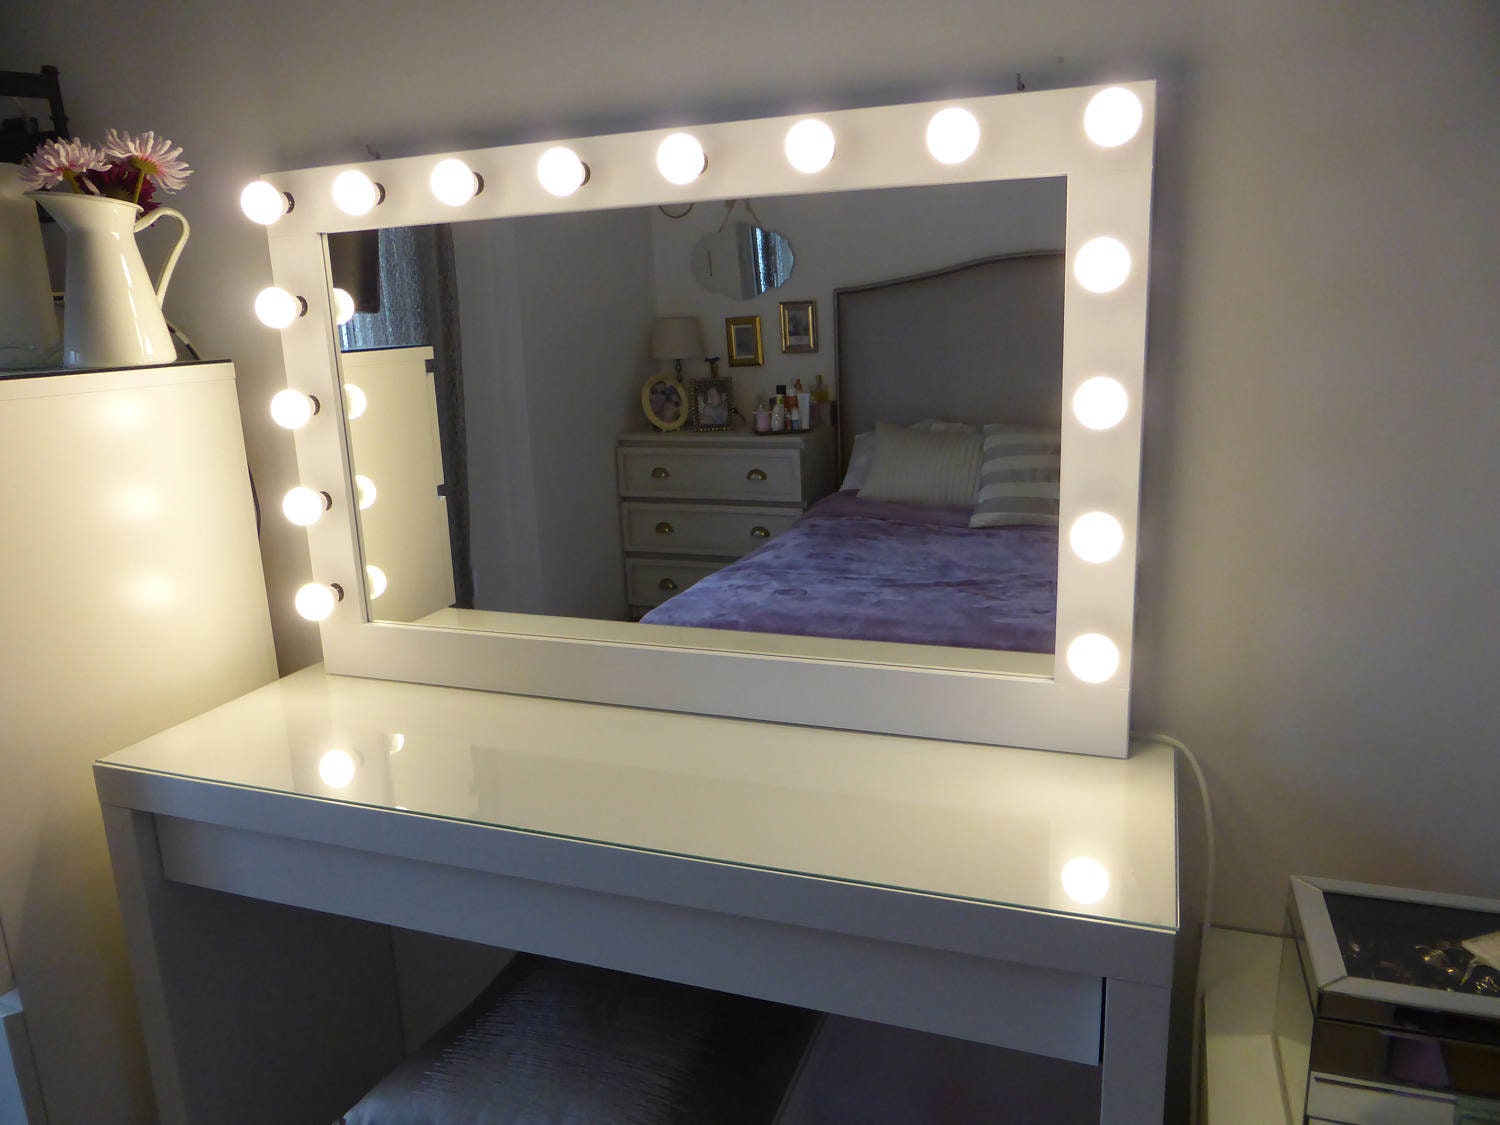 L Vanity Mirror 43x27 Hollywood, Vanity Table With Lighted Mirrors Hollywood Style